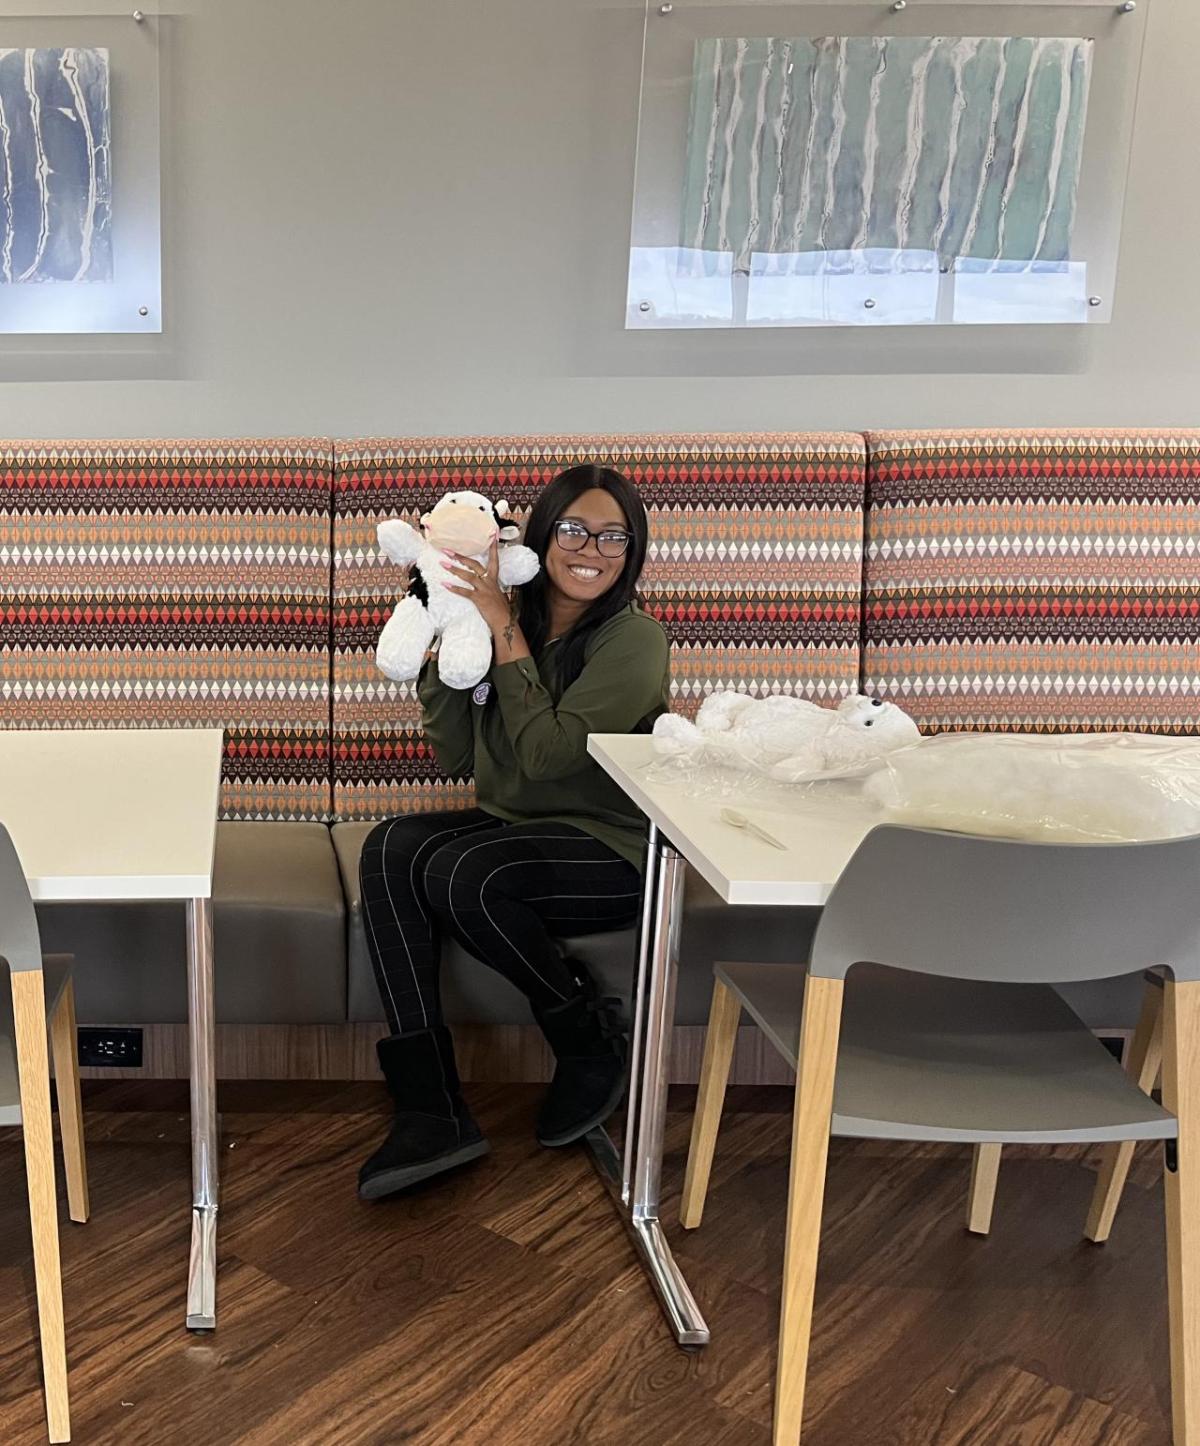 Covia employee poses with teddy bear for charities and hospitals